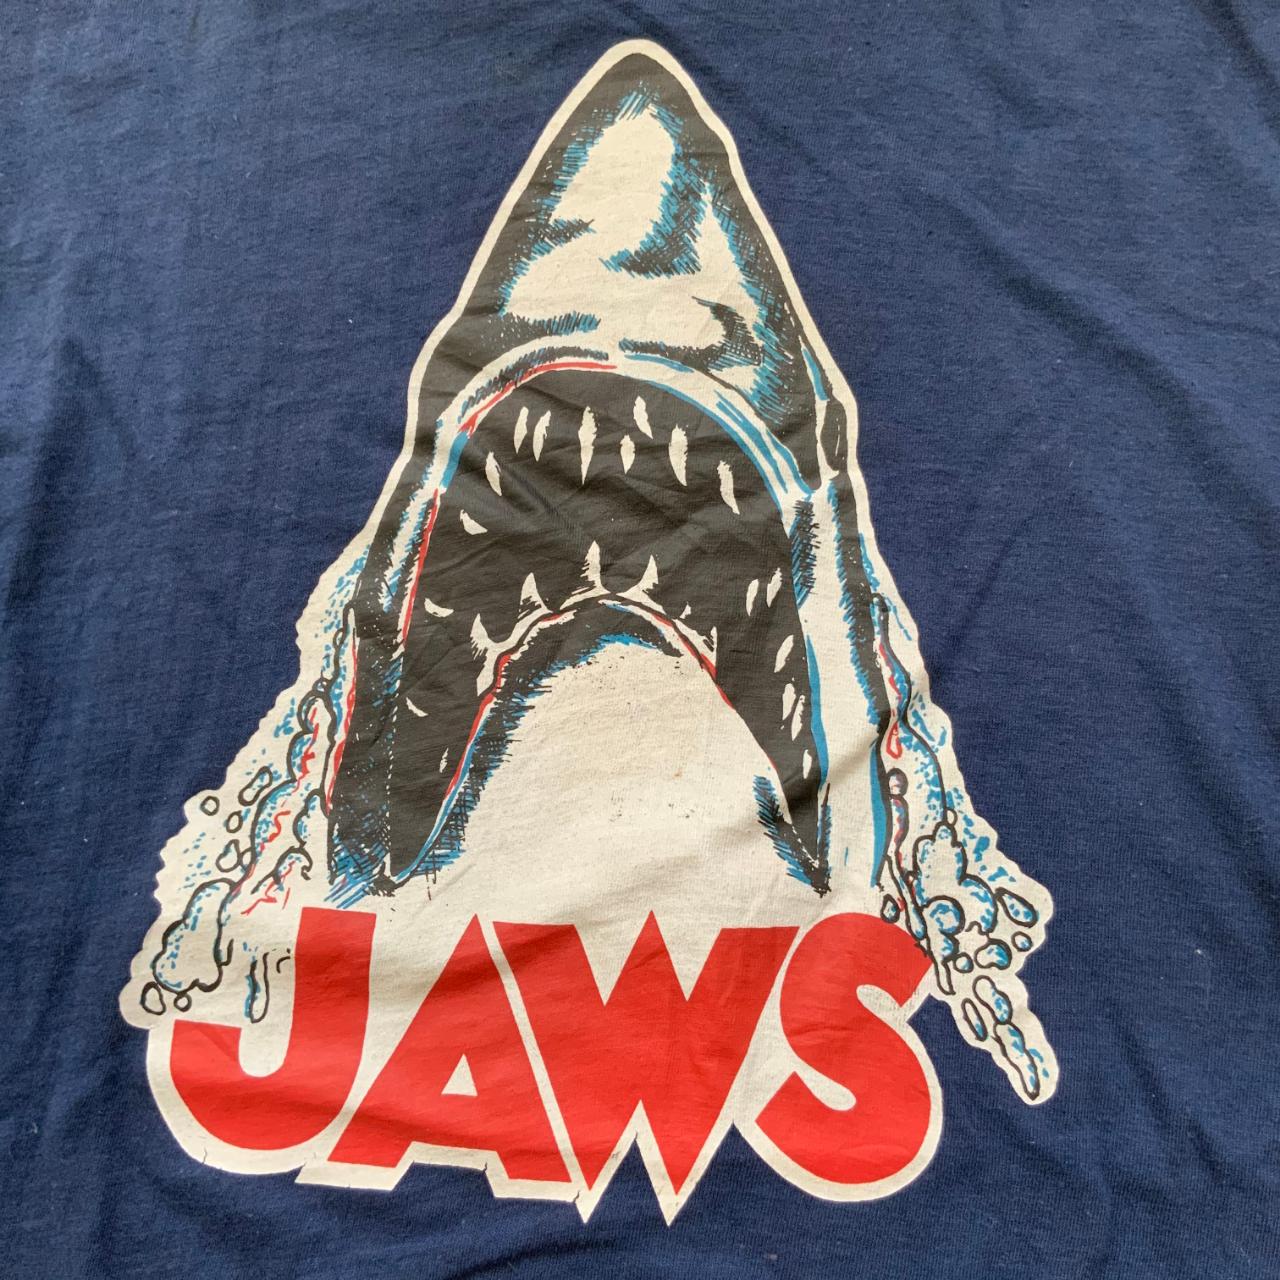 Vintage Jaws T-shirt Made in USA From 1970's Size... - Depop